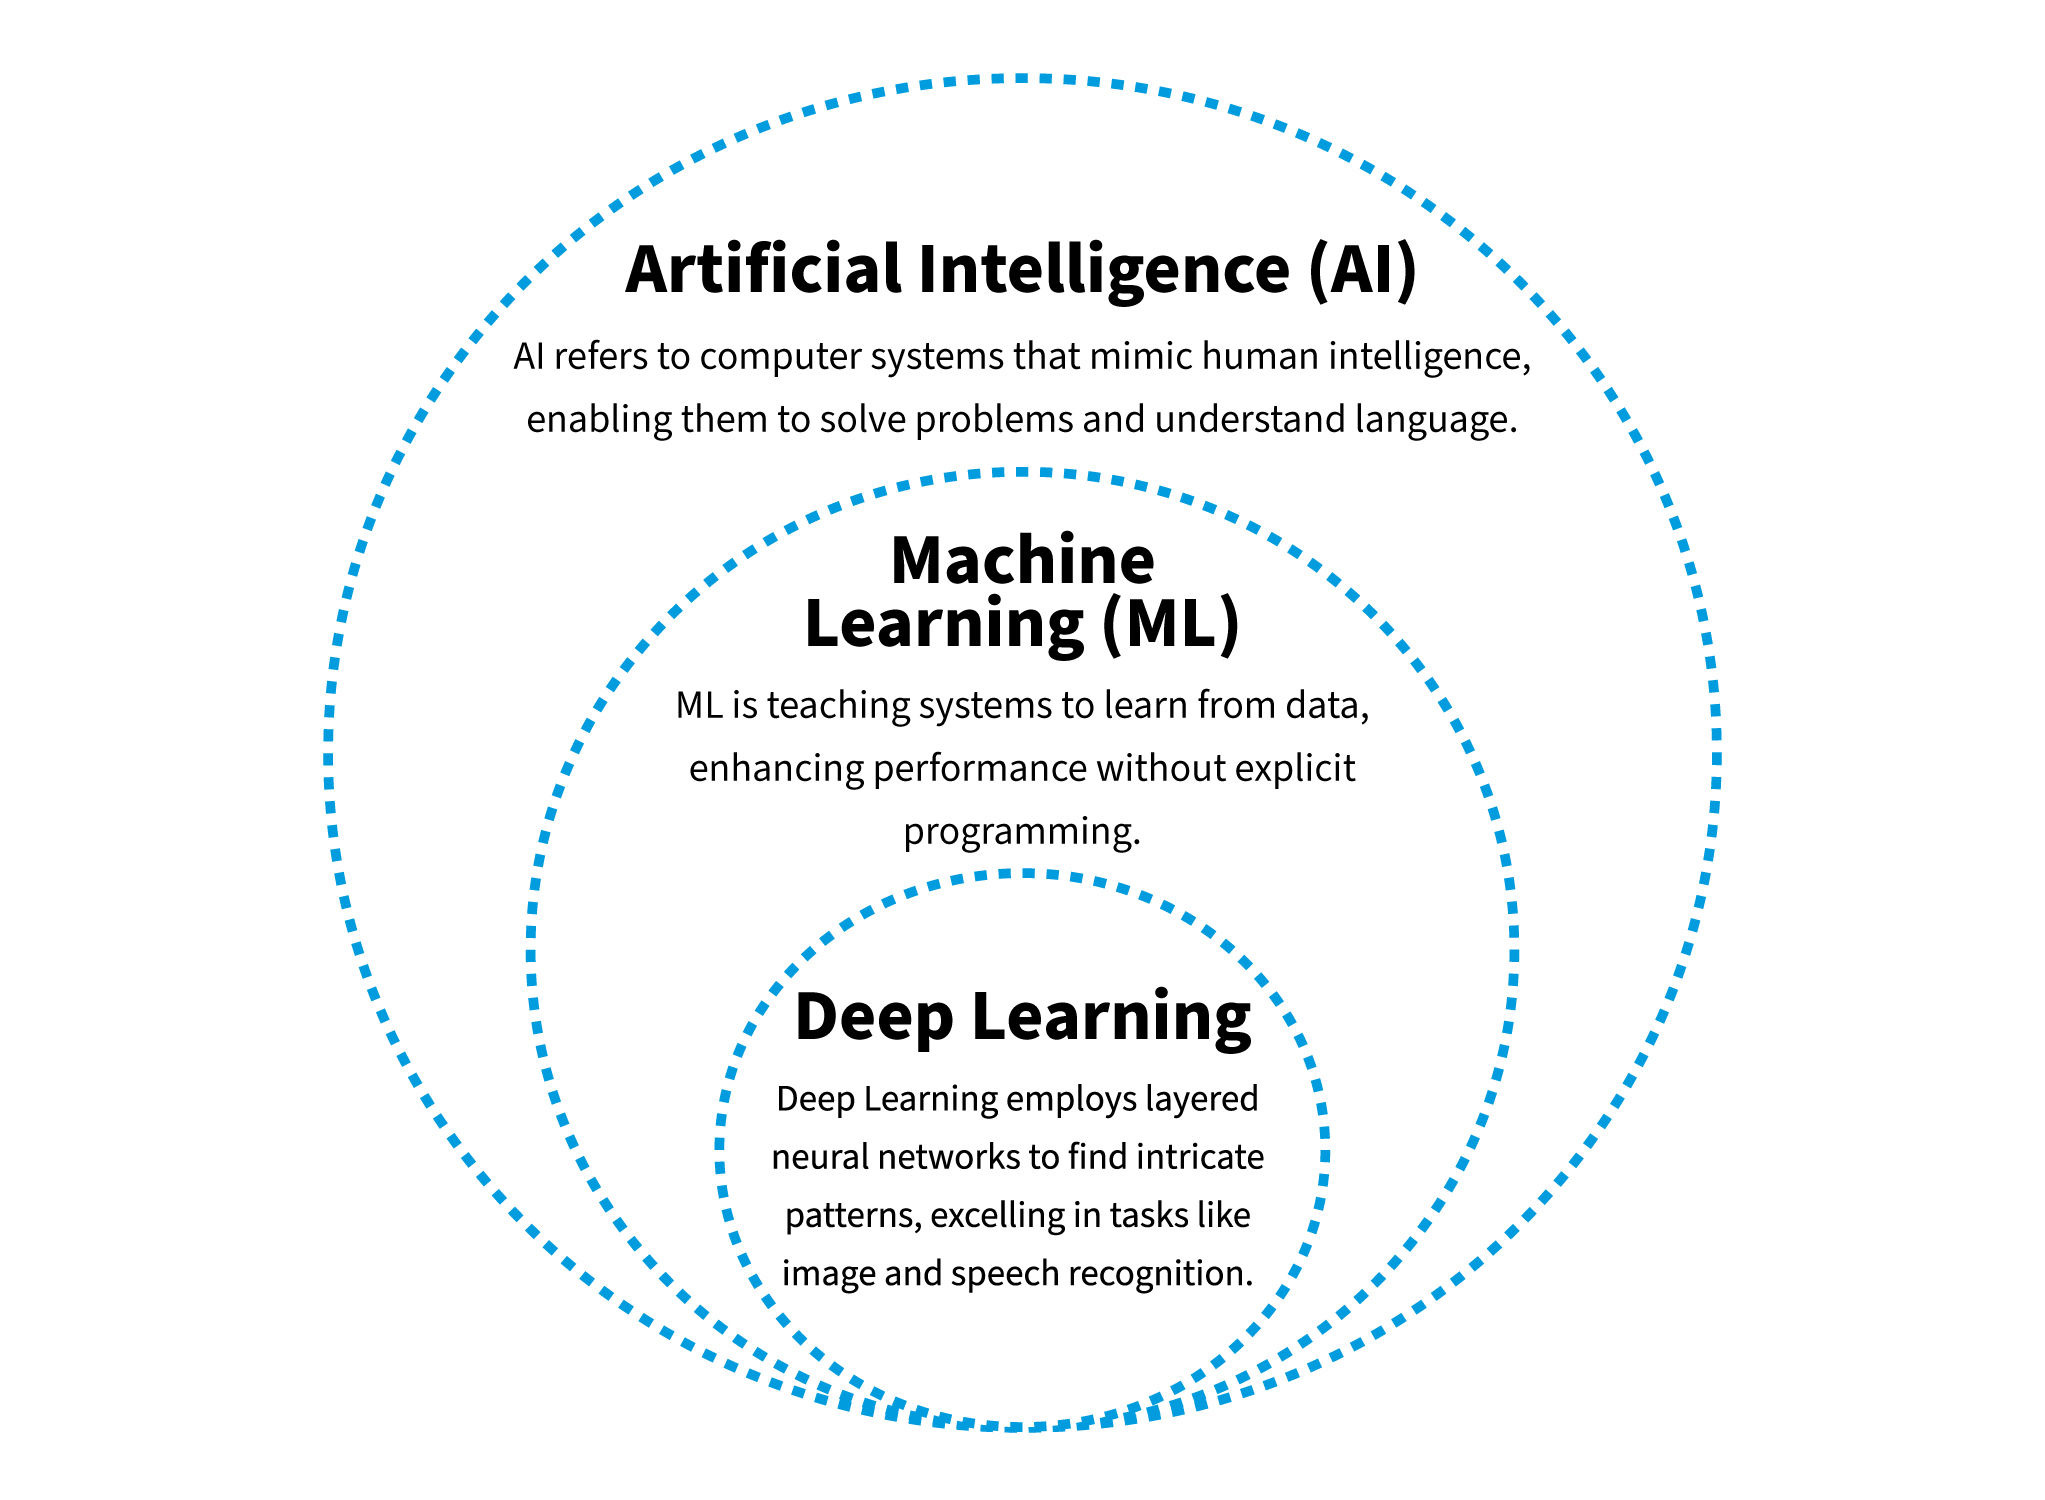 An illustrated infographic that demonstrates how machine learning and deep learning fits in with artificial intelligence.